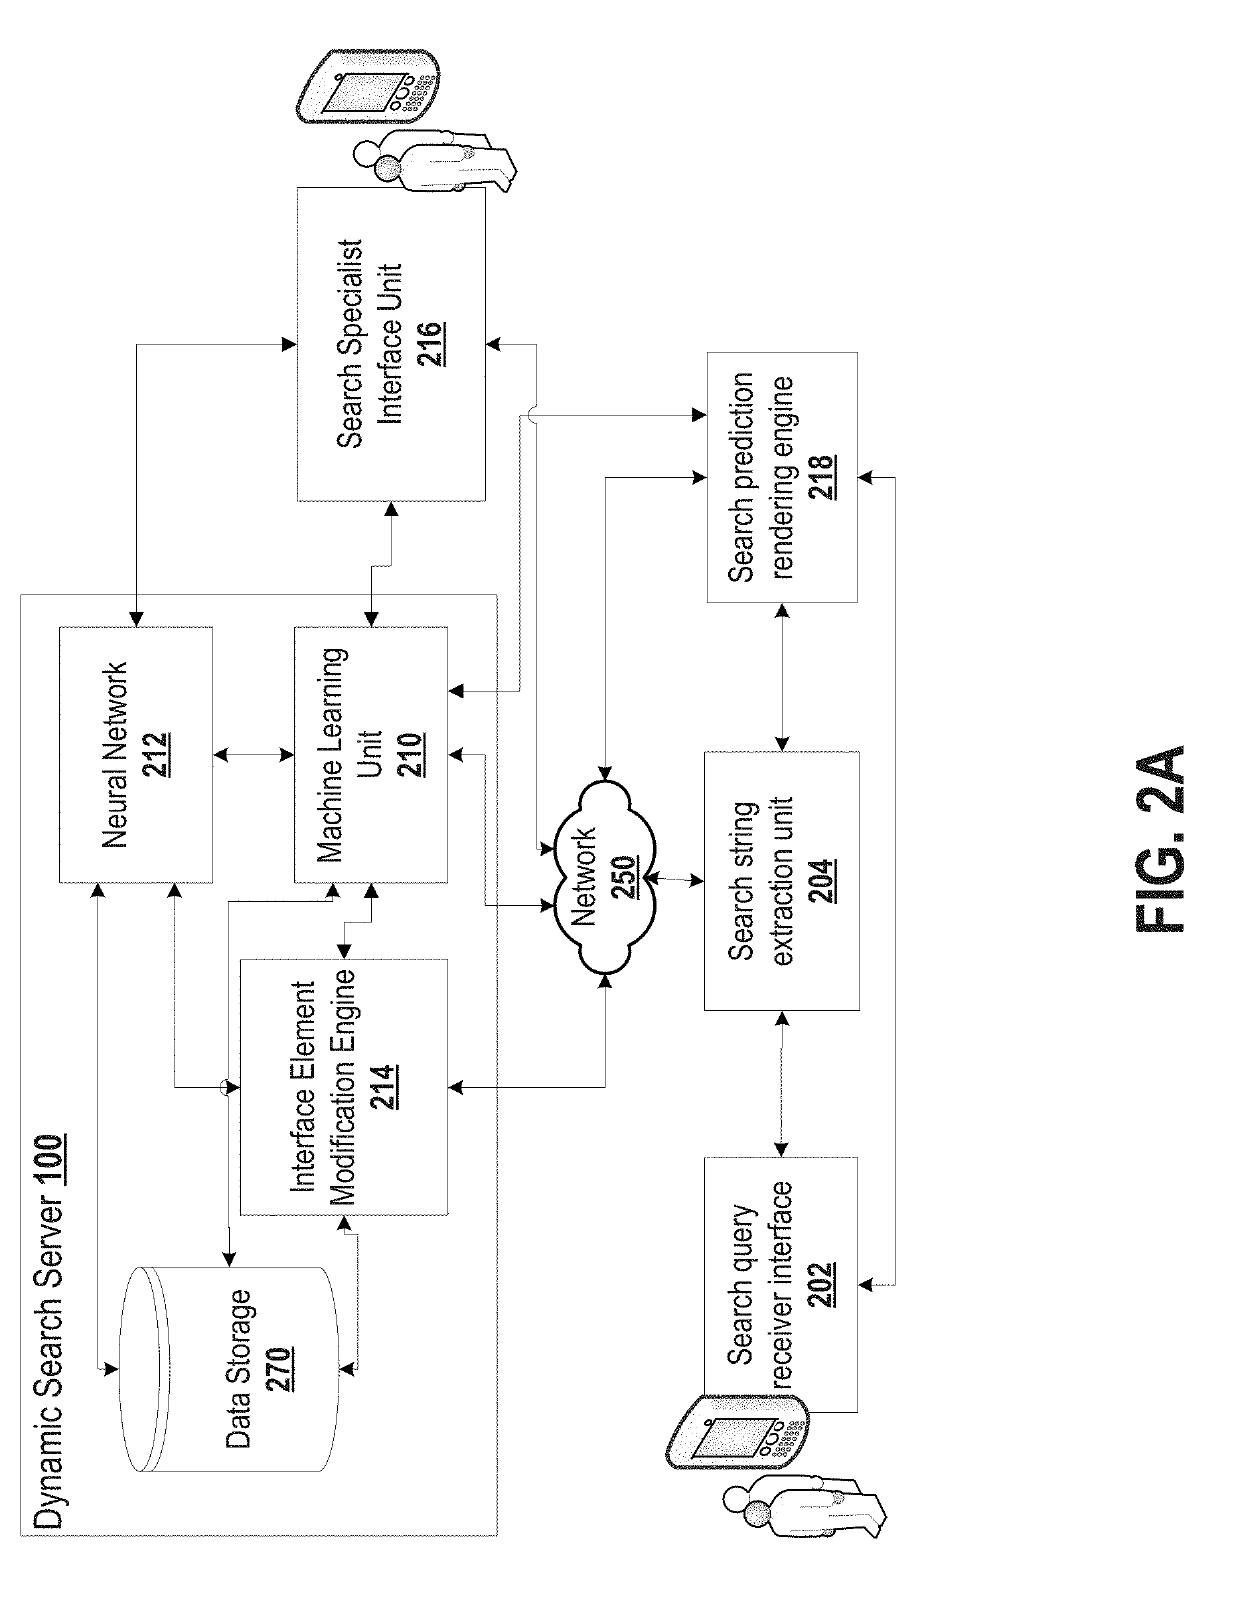 System and method for dynamic online search result generation